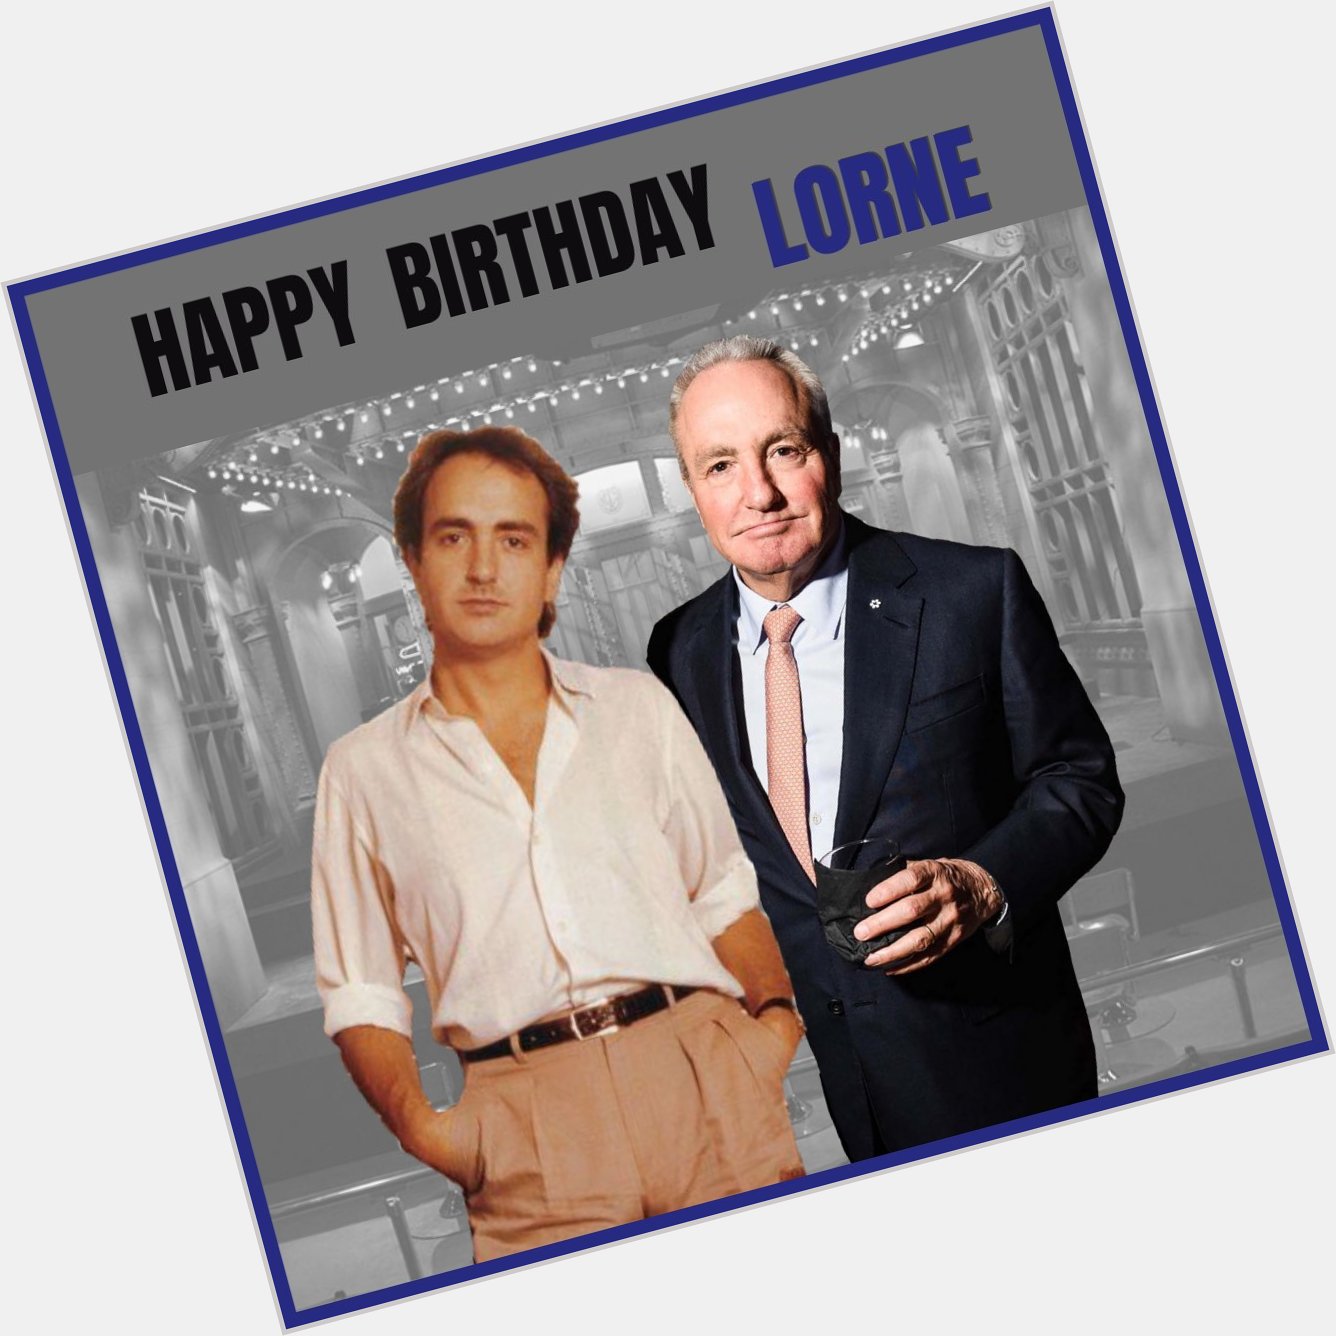 Happy birthday Lorne Michaels! Thank you for hiring Amy Poehler...we are forever indebted to you 